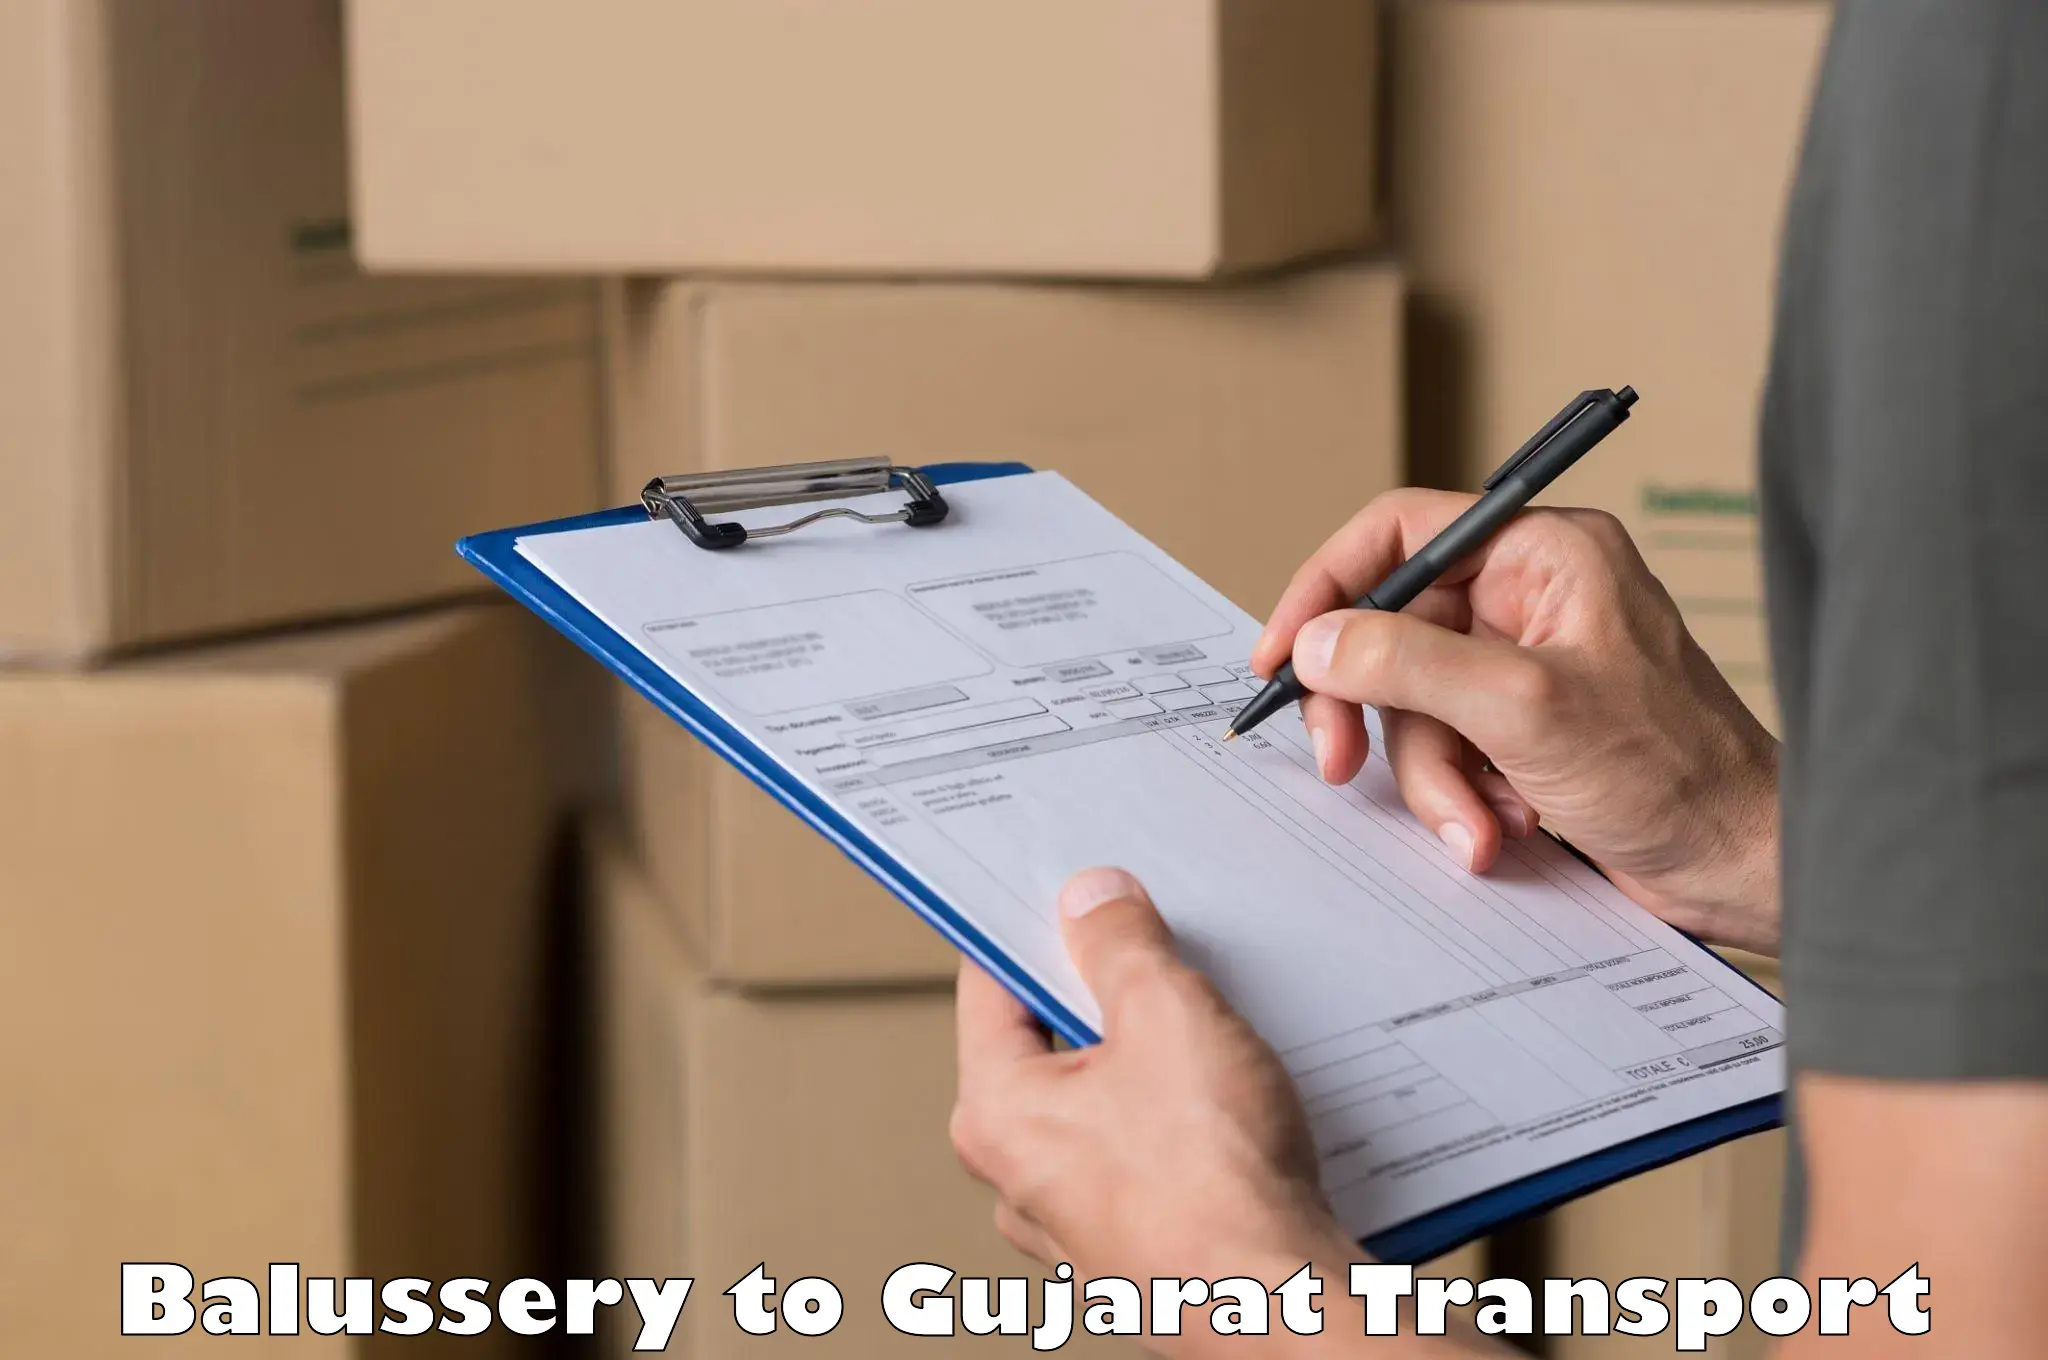 Nearby transport service Balussery to Ankleshwar